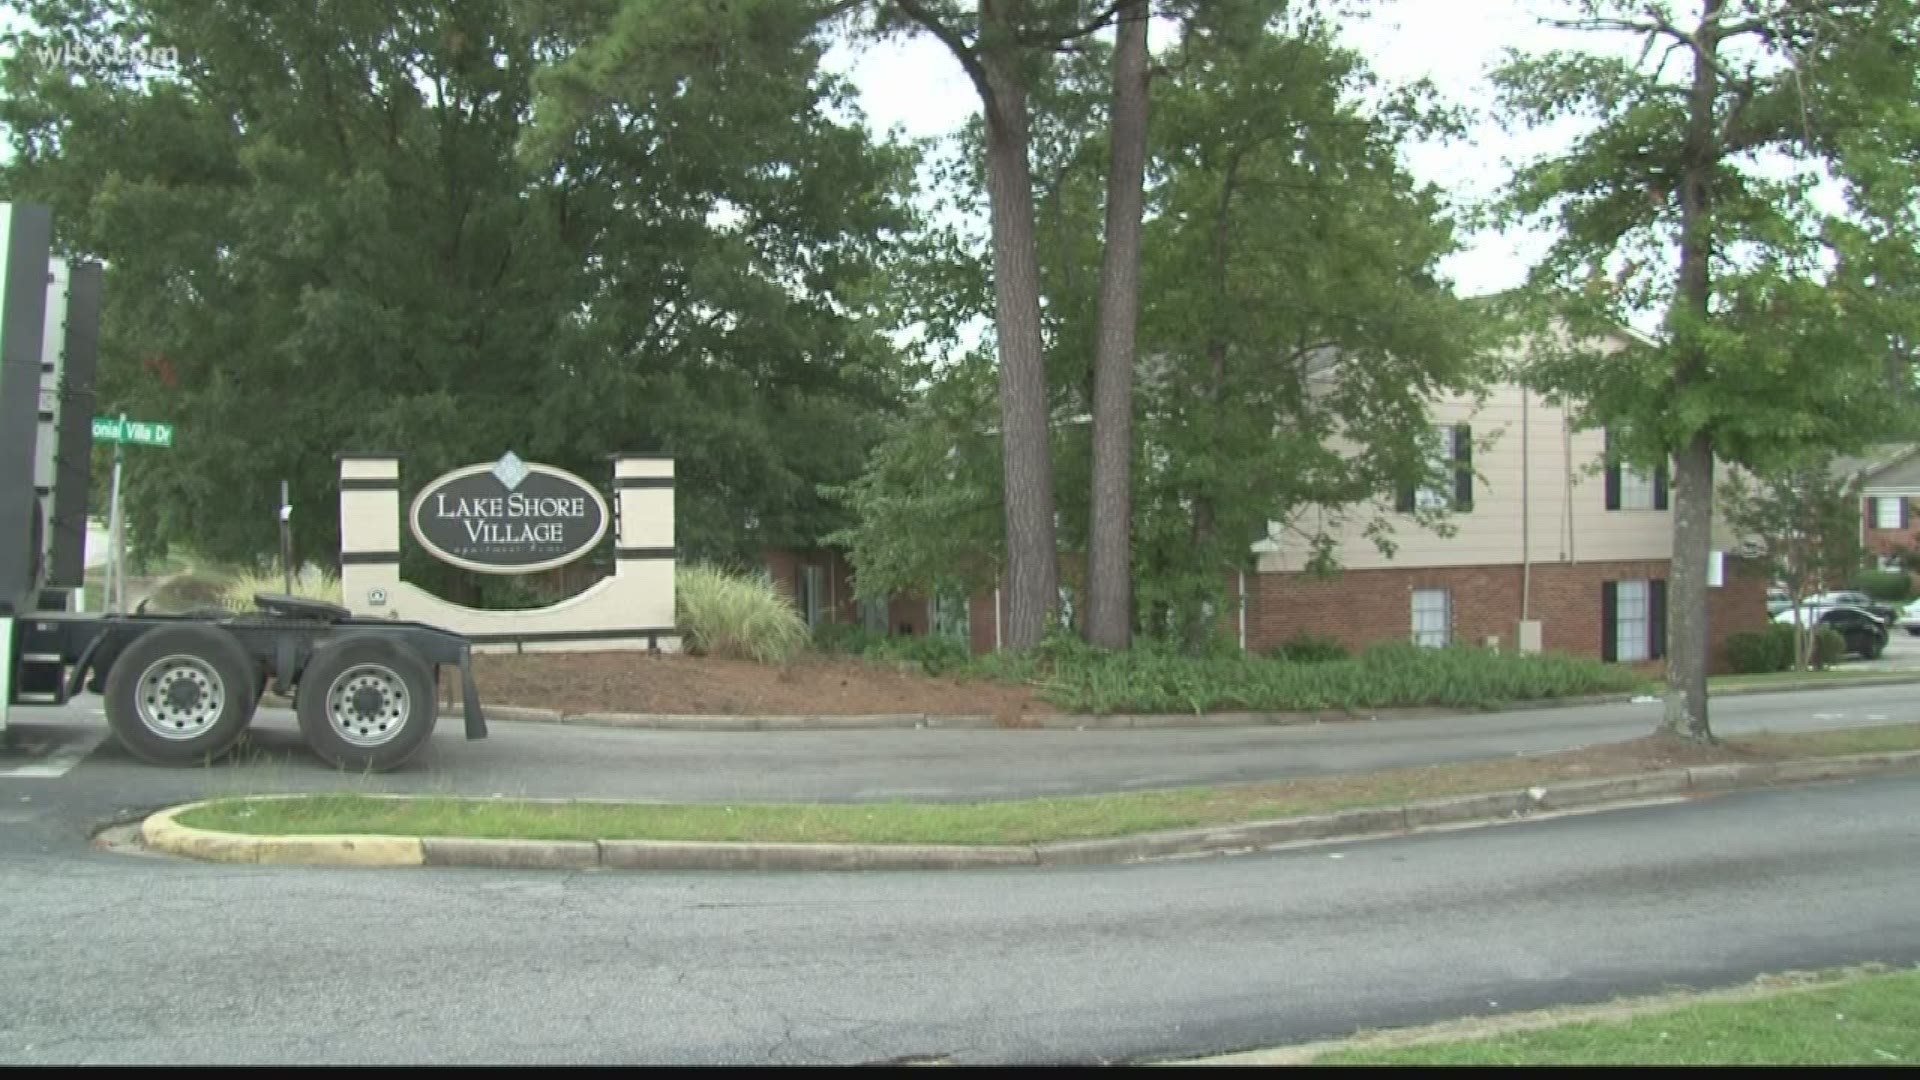 Gunshots rang out Saturday night at an apartment complex on Garners Ferry Road.